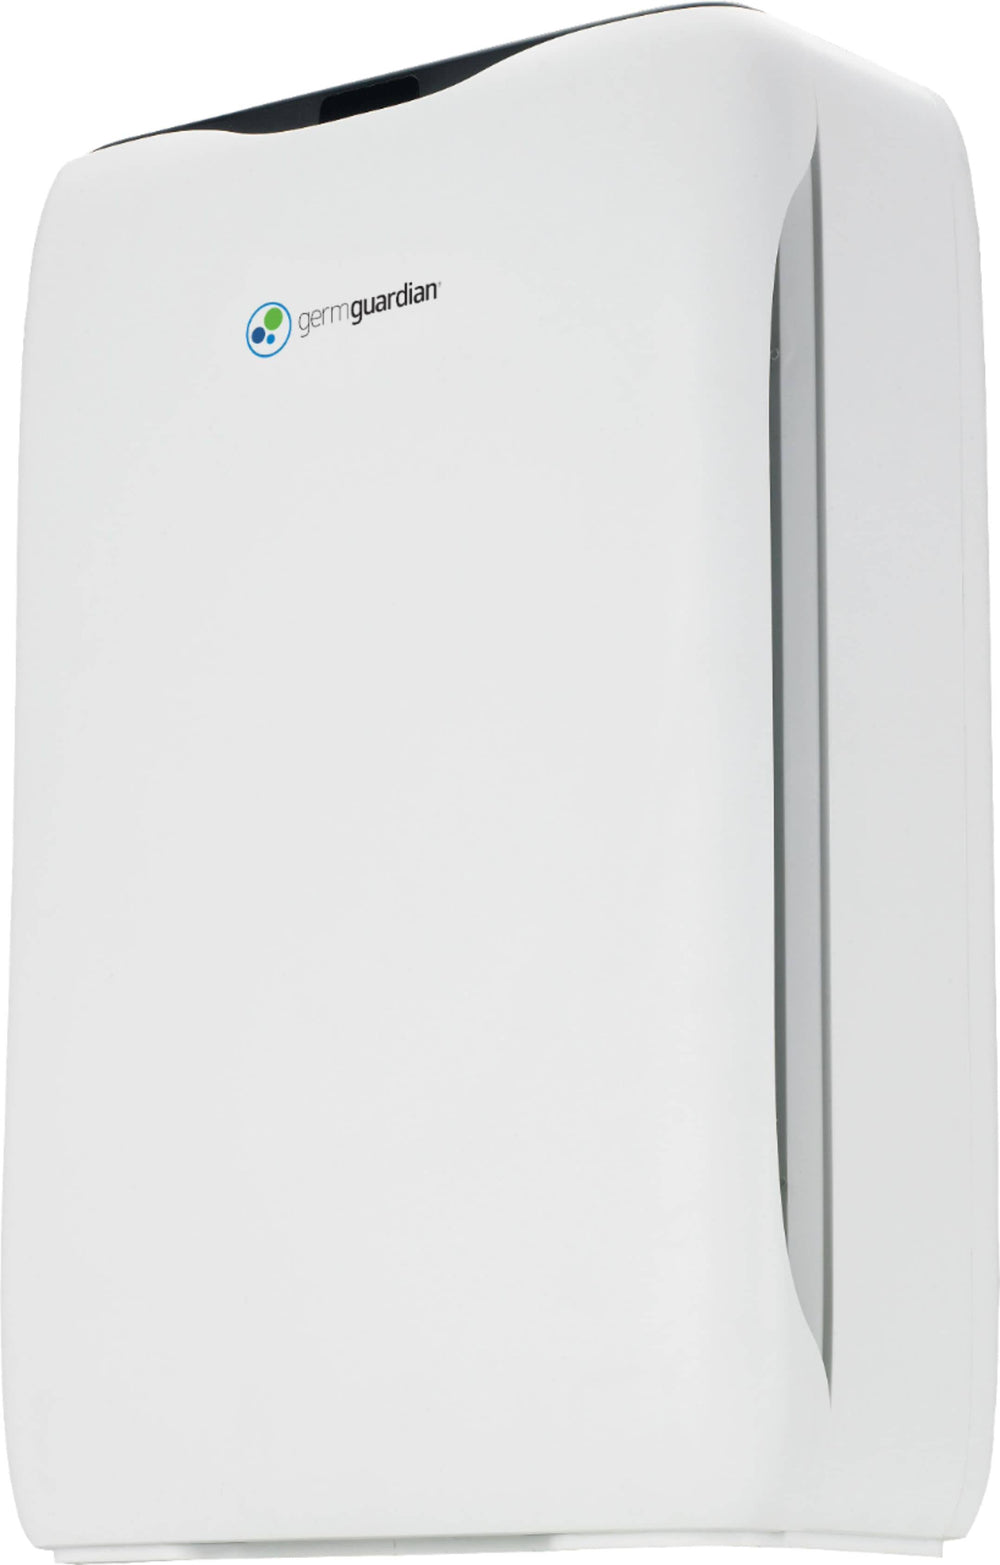 GermGuardian - 151 Sq. Ft Console Air Purifier - White_1